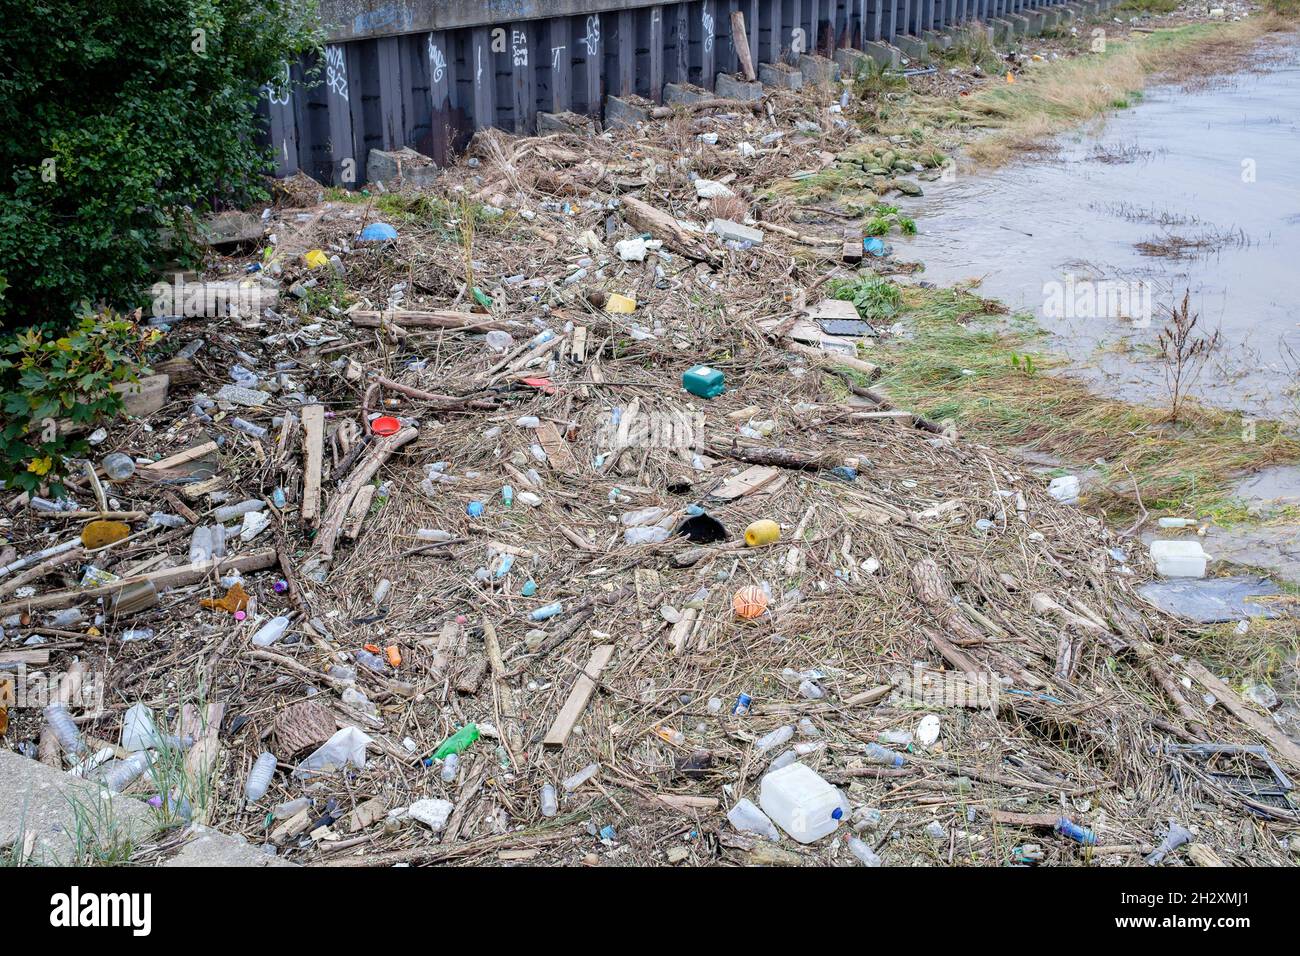 Plastic waste pollution, River Thames, East London, UK Stock Photo